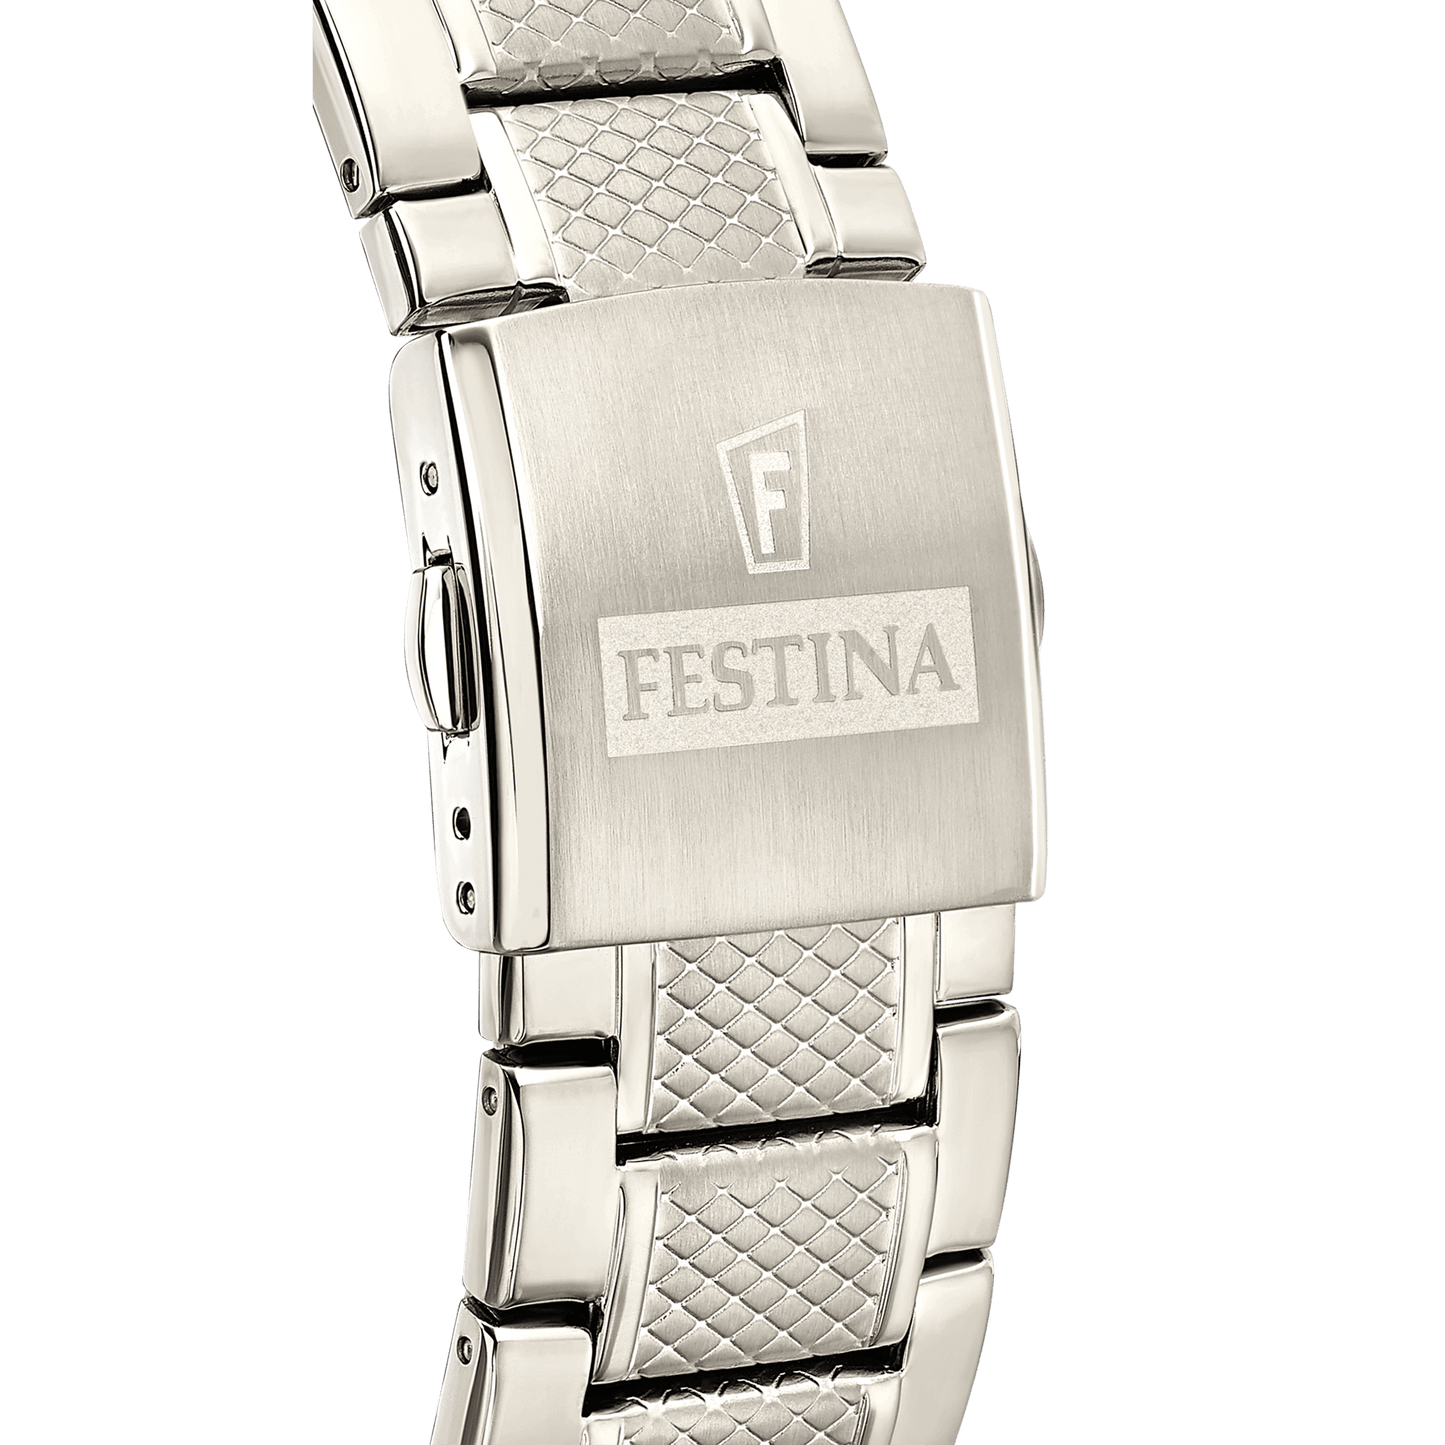 Chrono Sport F20439-6 | Water Resistance 100m/330ft - Strap Material Stainless Steel - Size 44 mm / Free shipping, 2 years warranty & 30 Days Return | Festina Watches USA